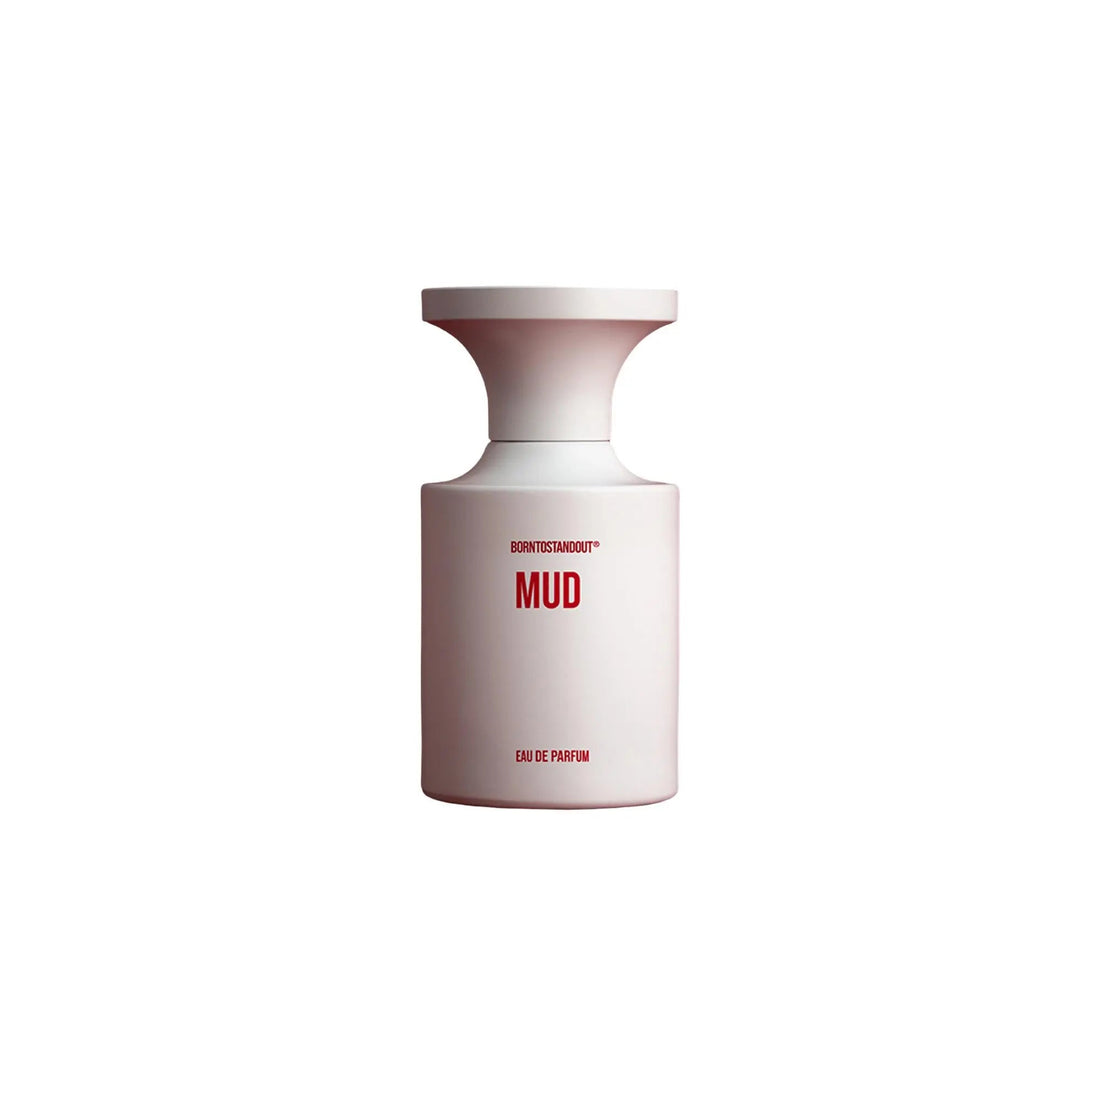 Born to stand out Mud - 50 ml